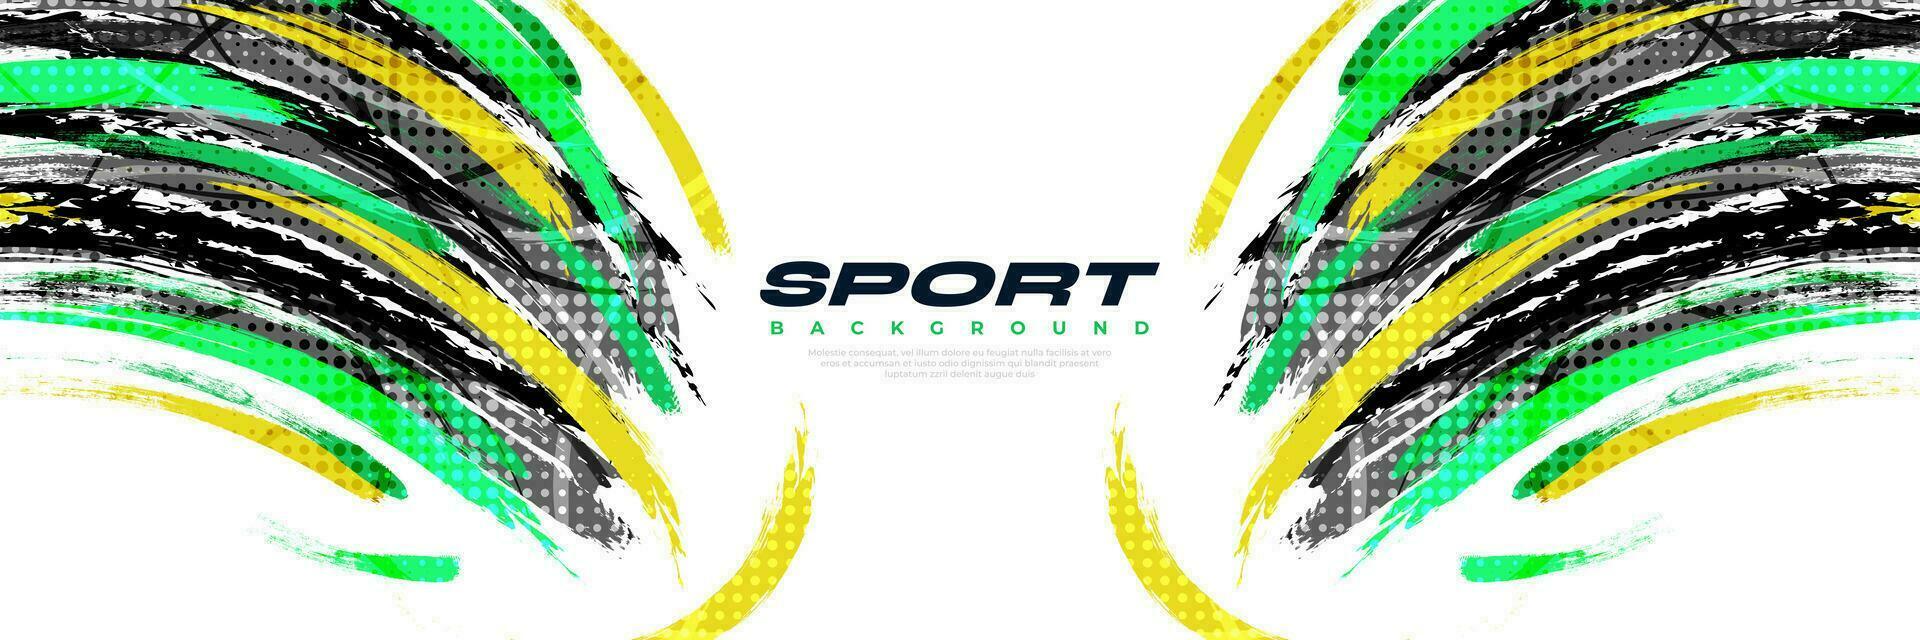 Abstract and Colorful Brush Background. Sport Banner. Brush Stroke Illustration. Scratch and Texture Elements For Design vector